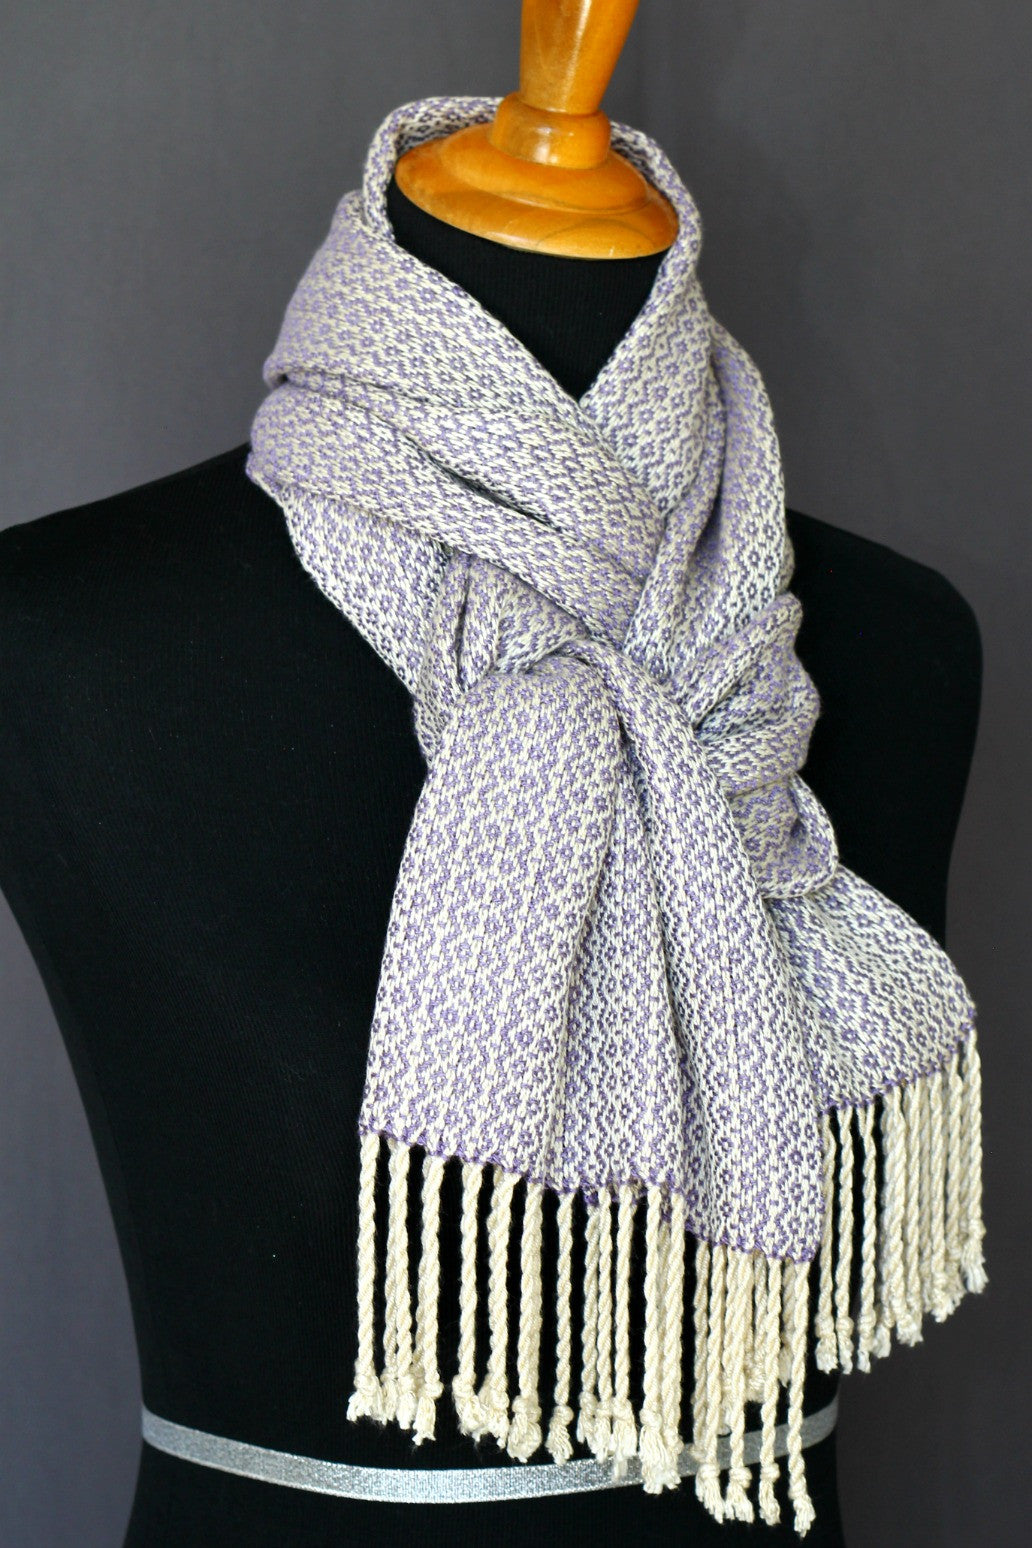 Woven scarf in violet colors, bamboo scarf, summer scarf, long scarf with fringe